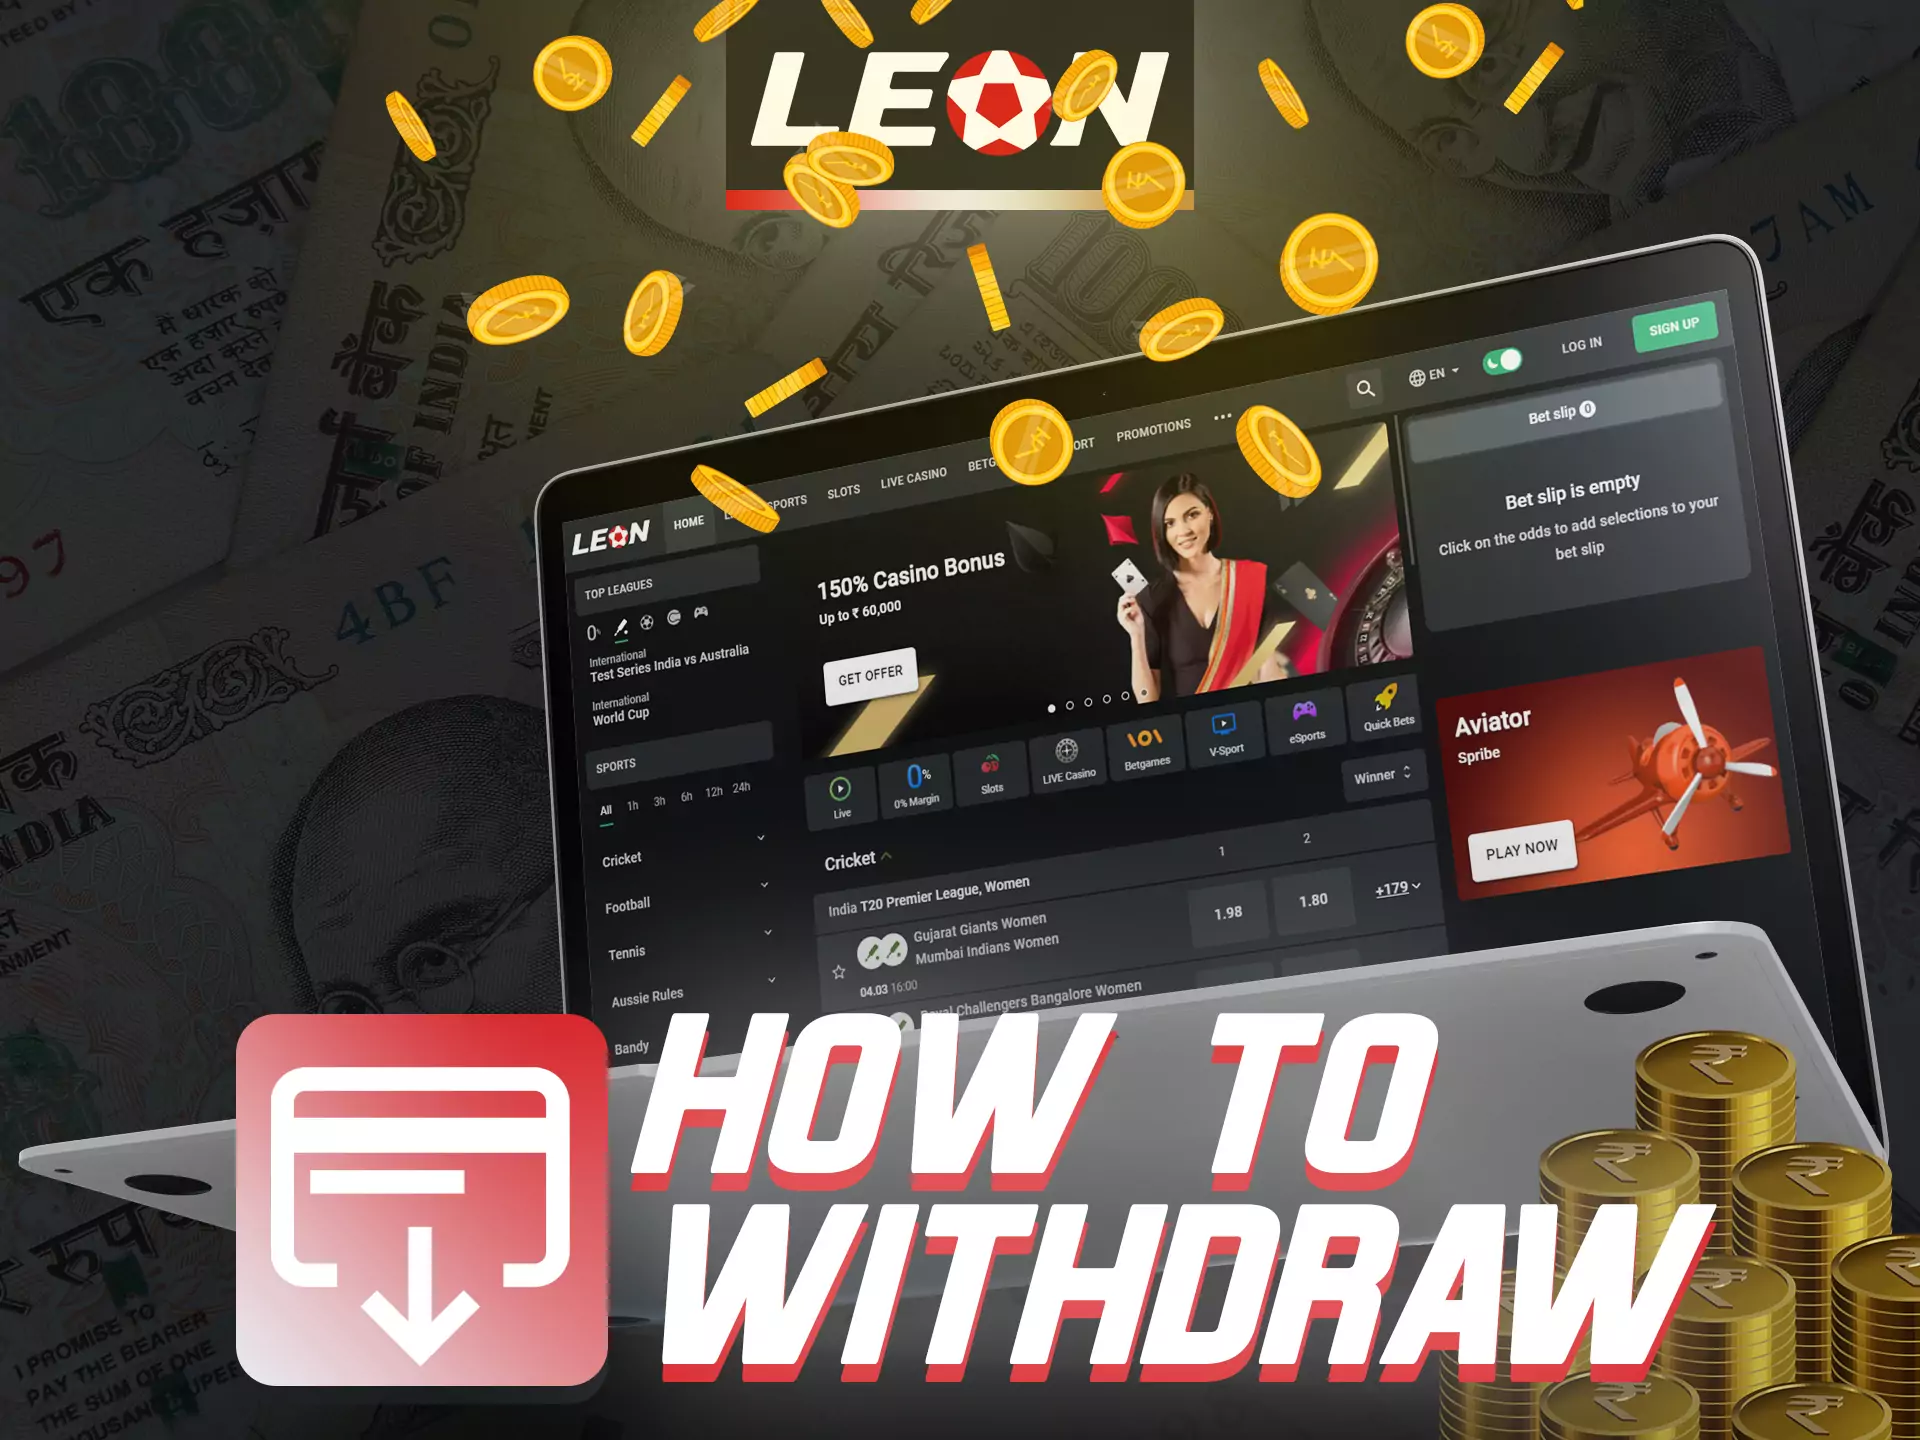 With Leonbet you can easily withdraw your winnings.